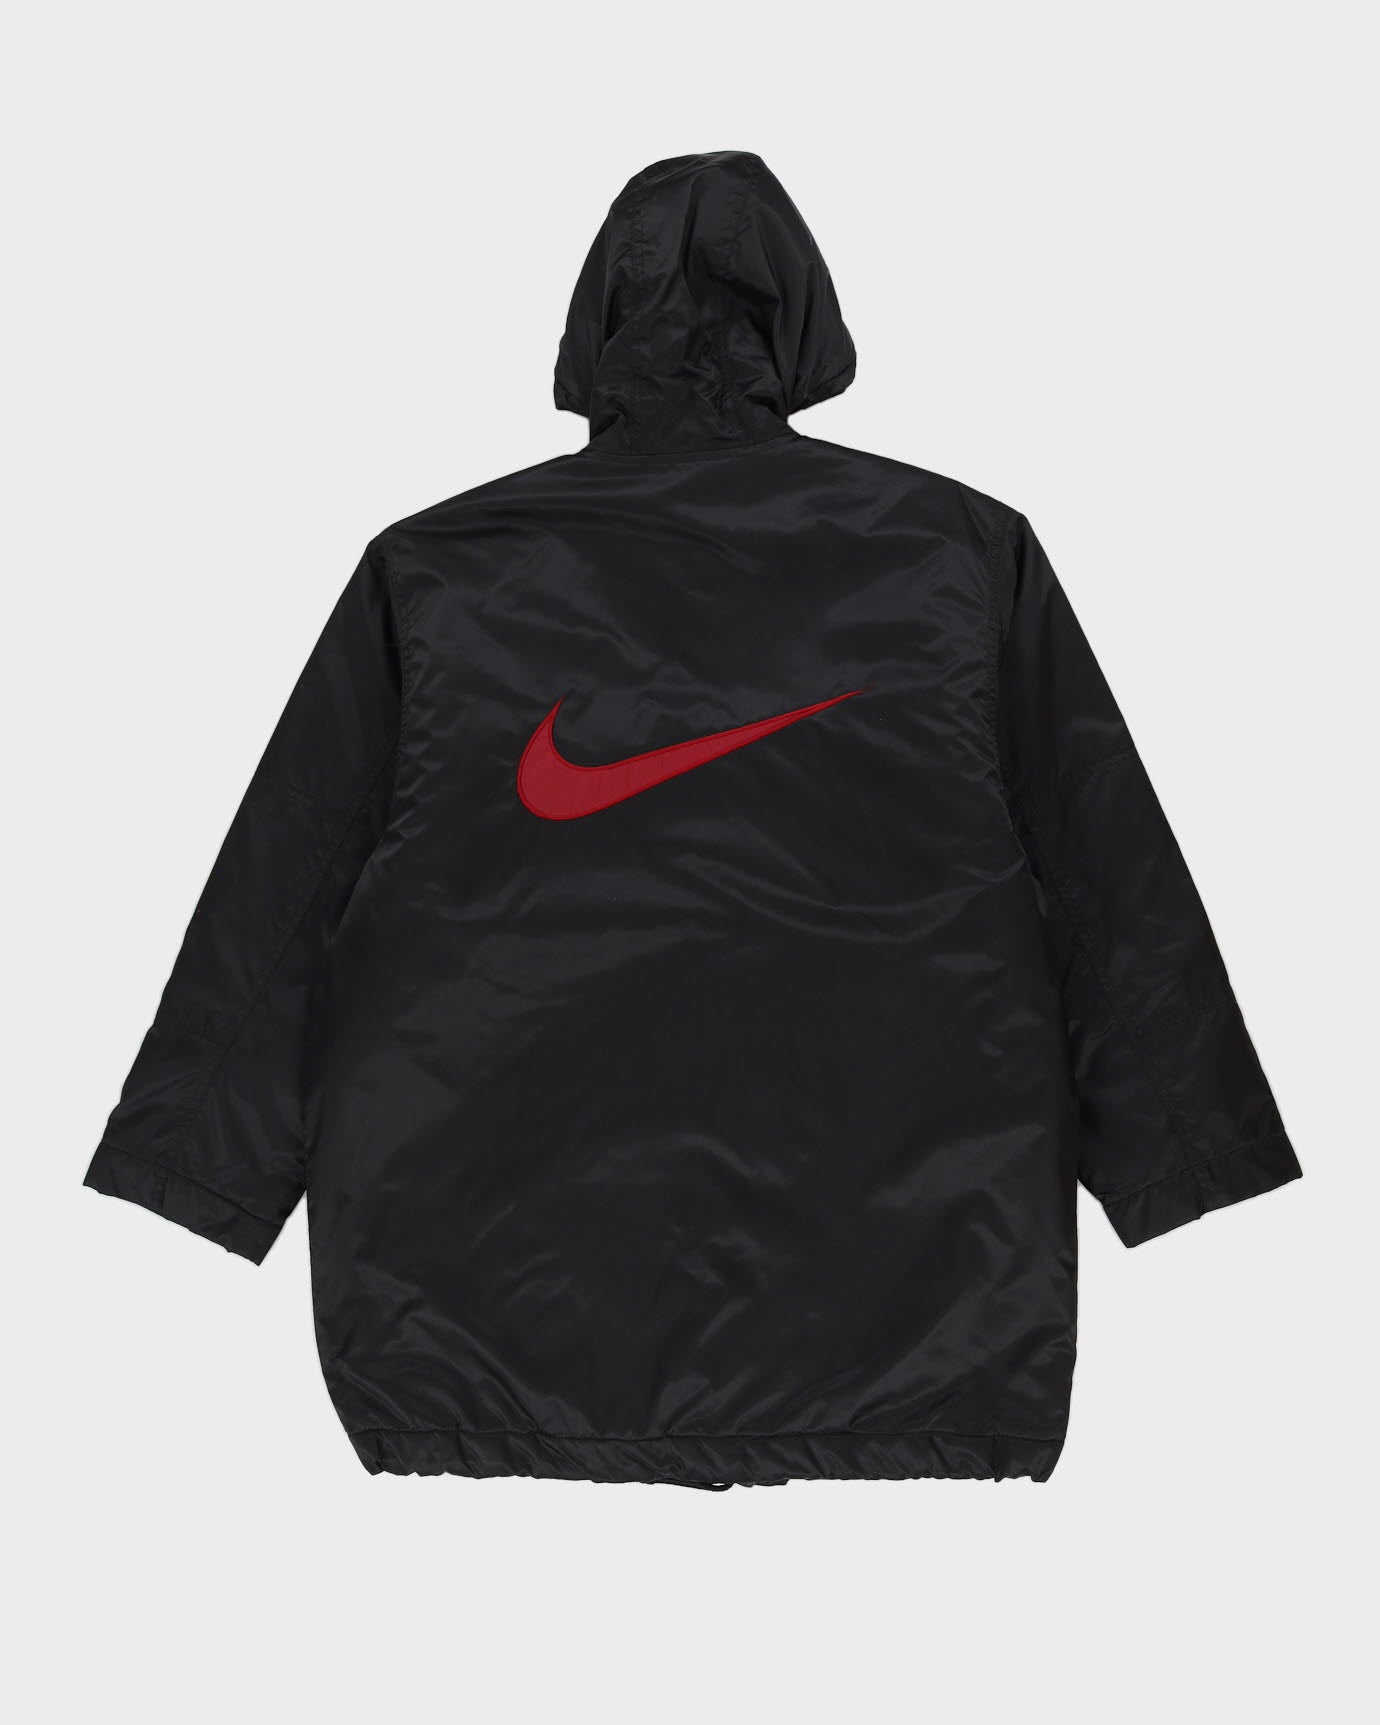 Vintage 90s Nike Black Puffer Jacket With Embroidered Logo - XL